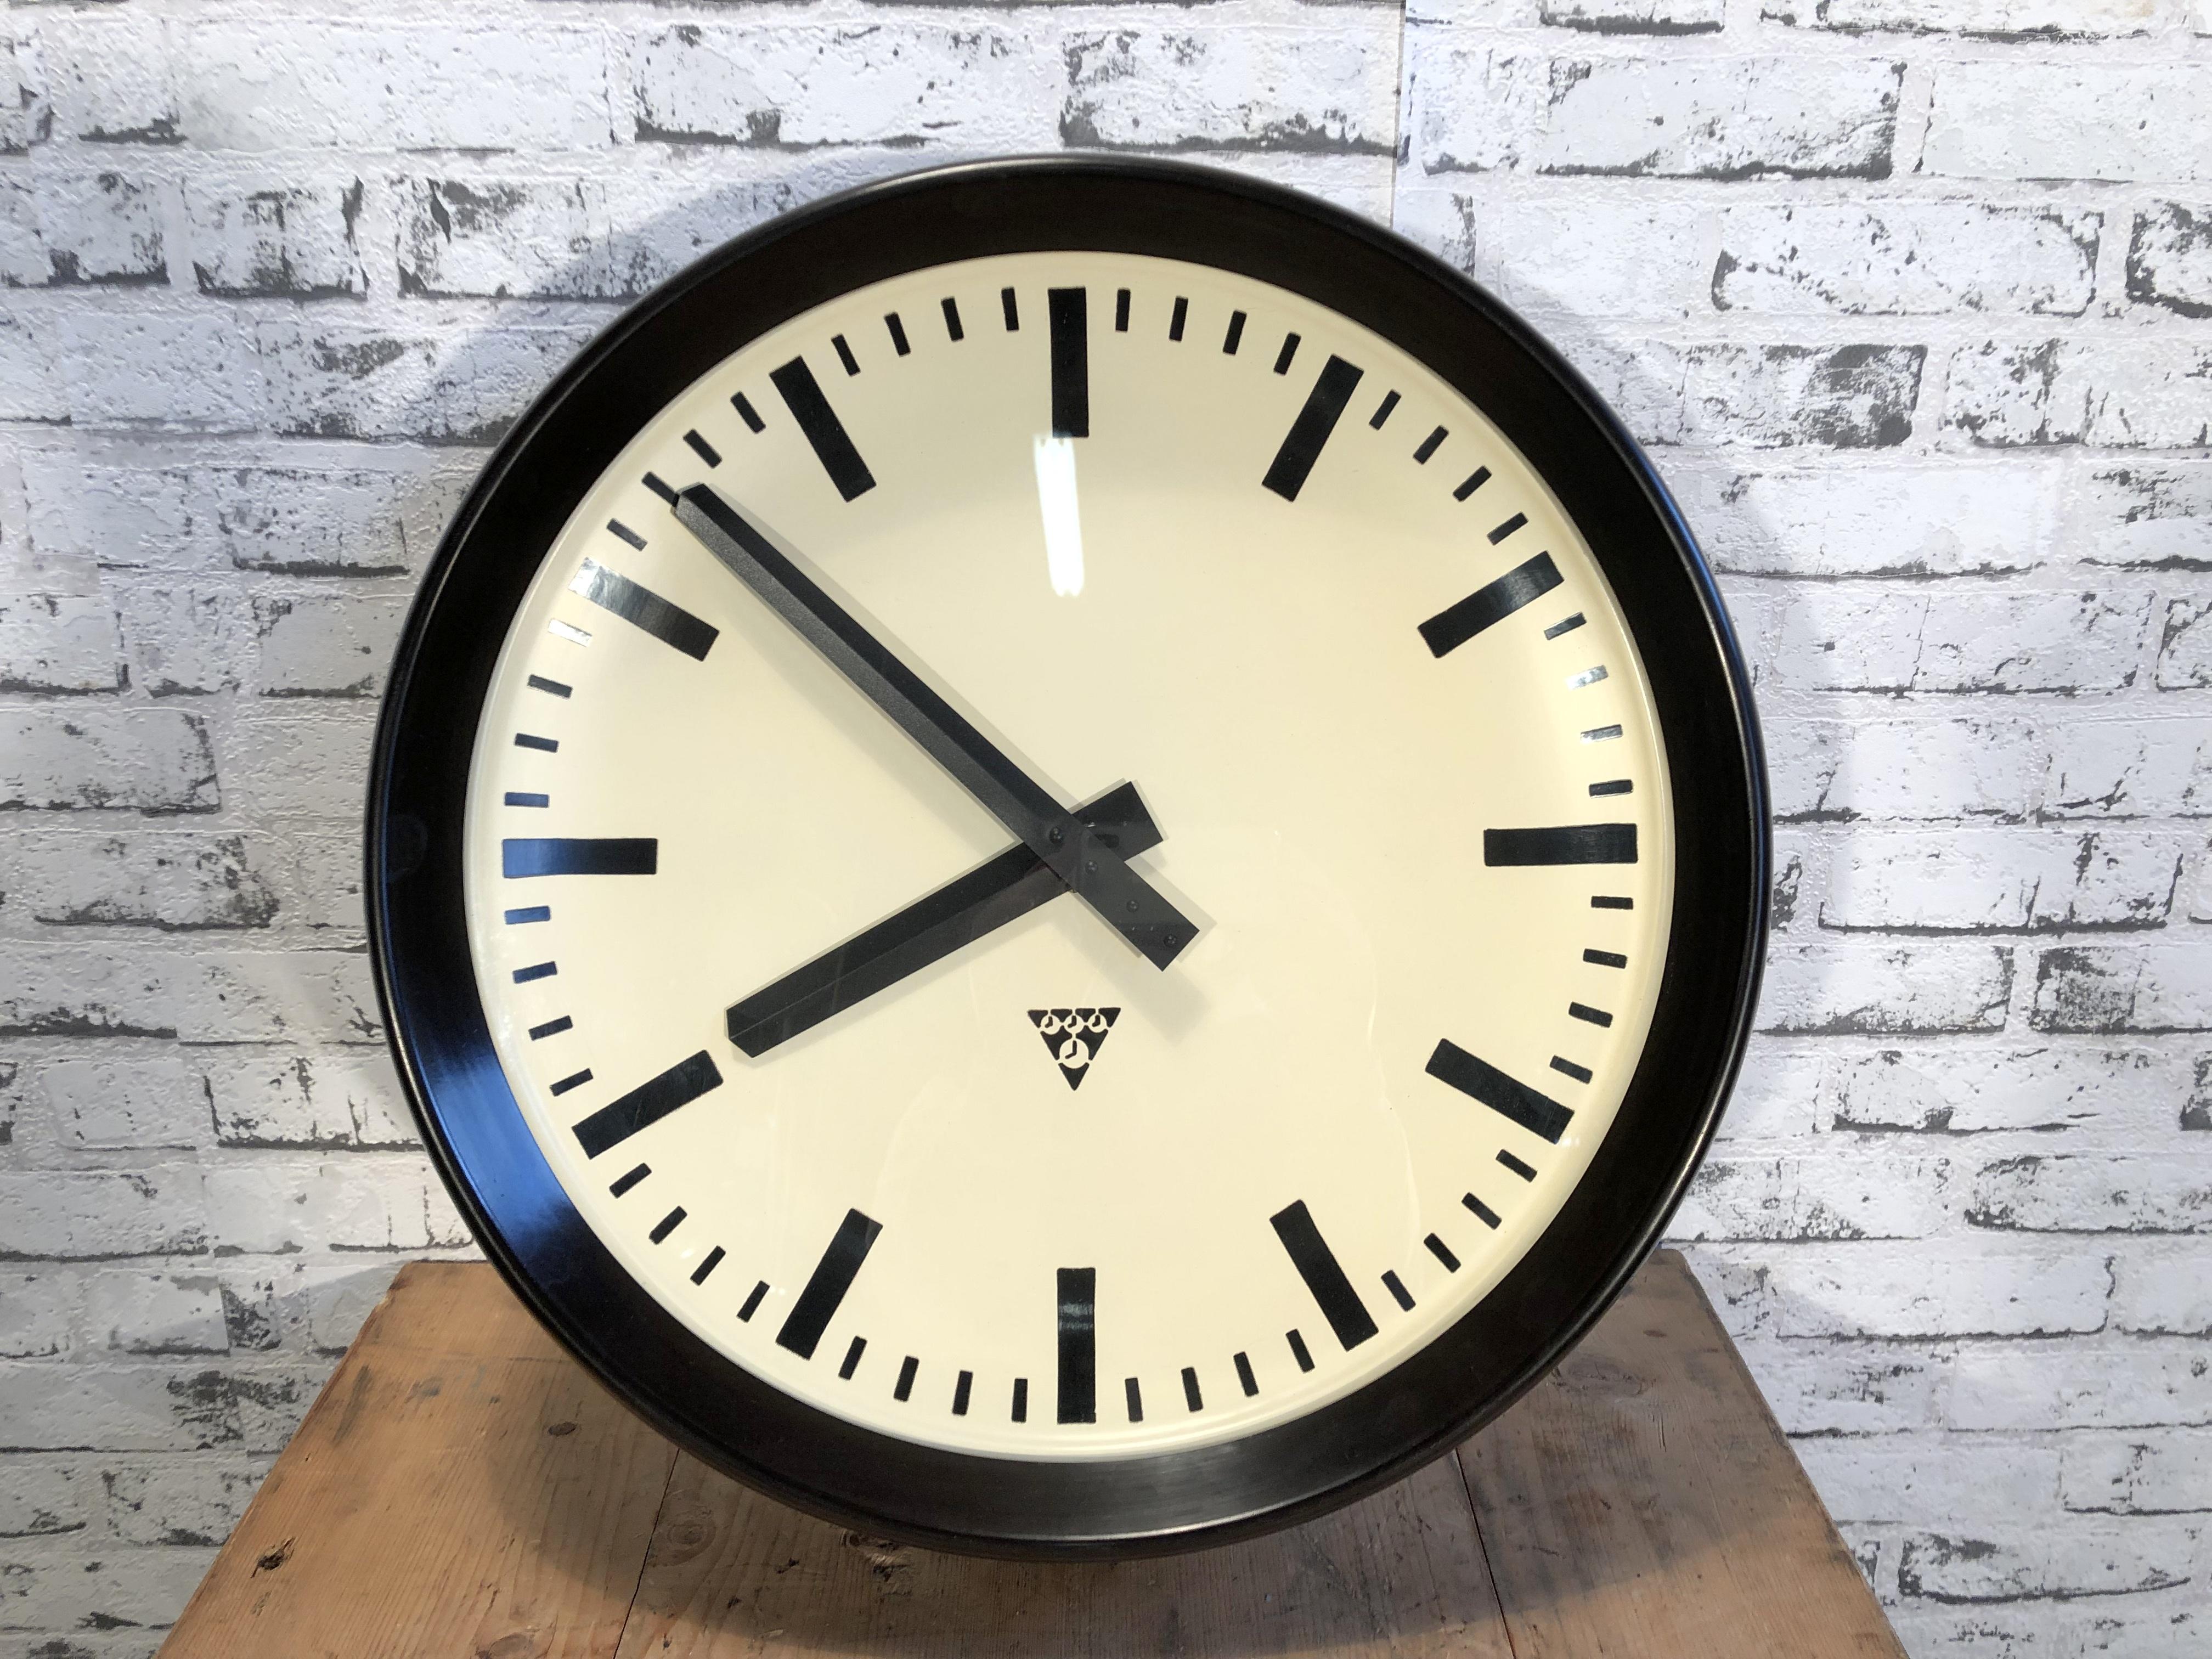 This large wall clock was produced by Pragotron in former Czechoslovakia during the 1960s.It features a brown bakelite frame, aluminum dial and clear glass cover. The piece has been converted into a battery-powered clockwork and requires only one